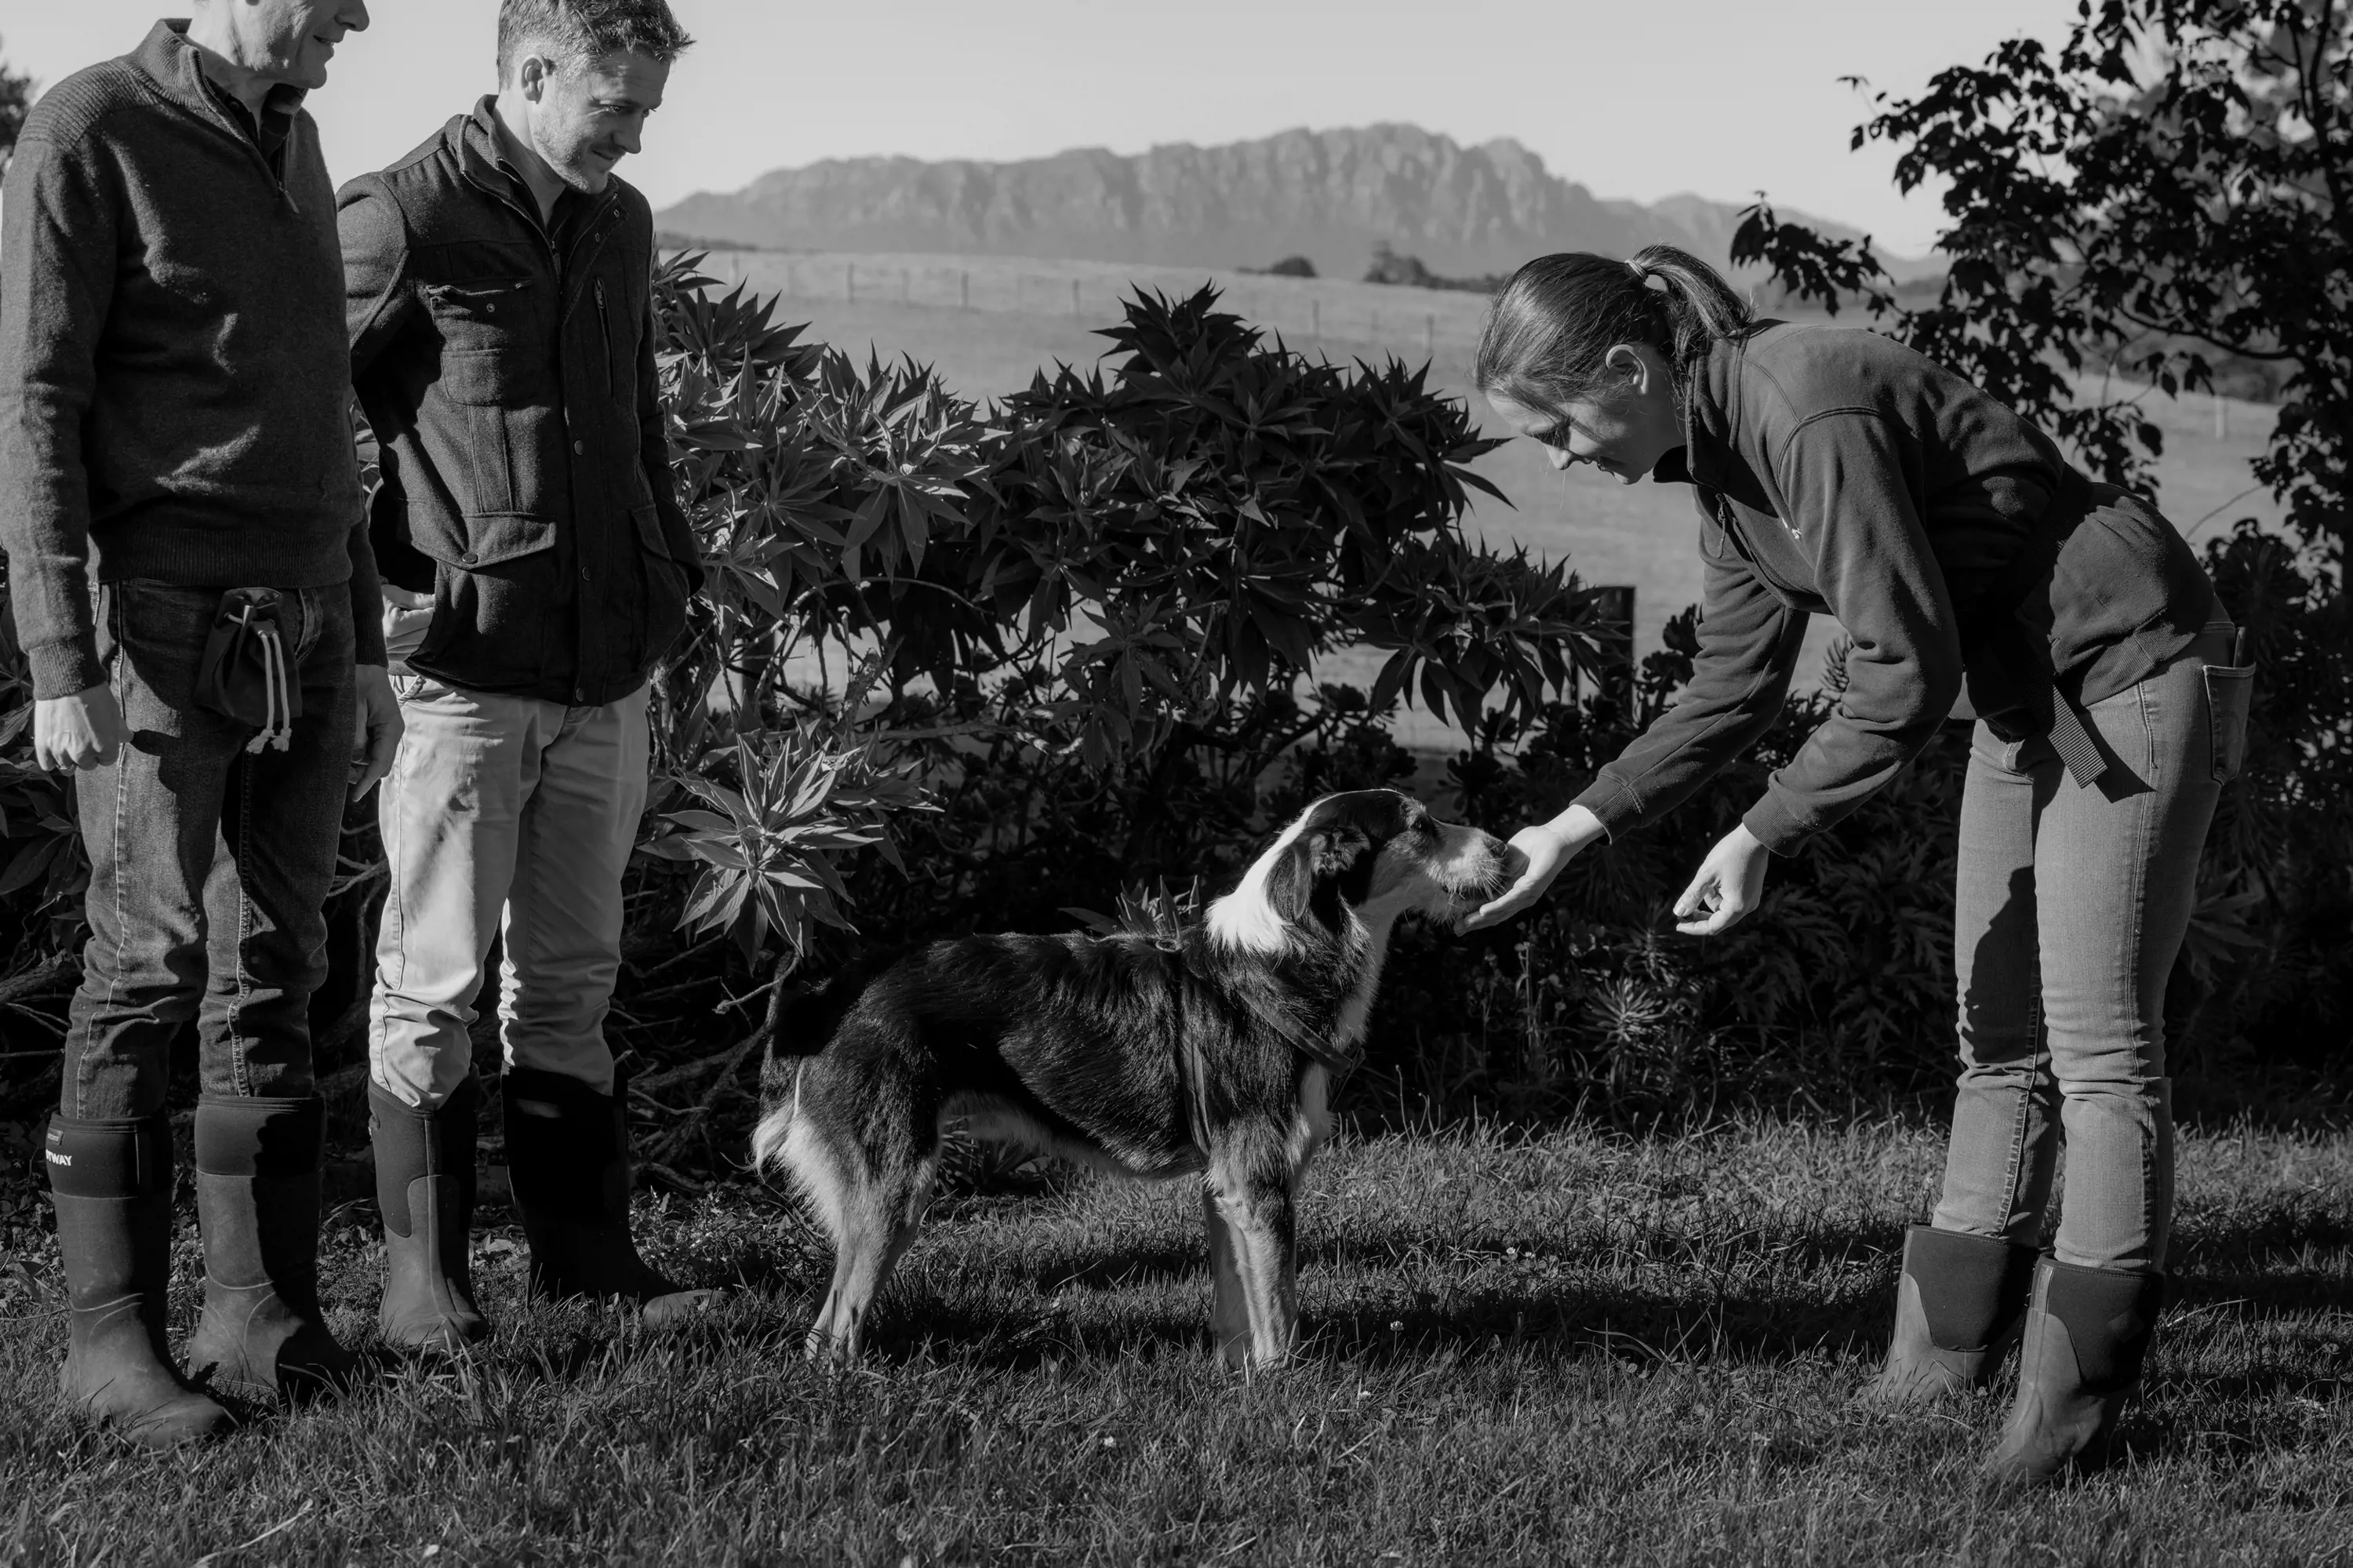 A woman stands in green grass in a garden and feeds a truffle hunting dog. Two men stand by and watch.